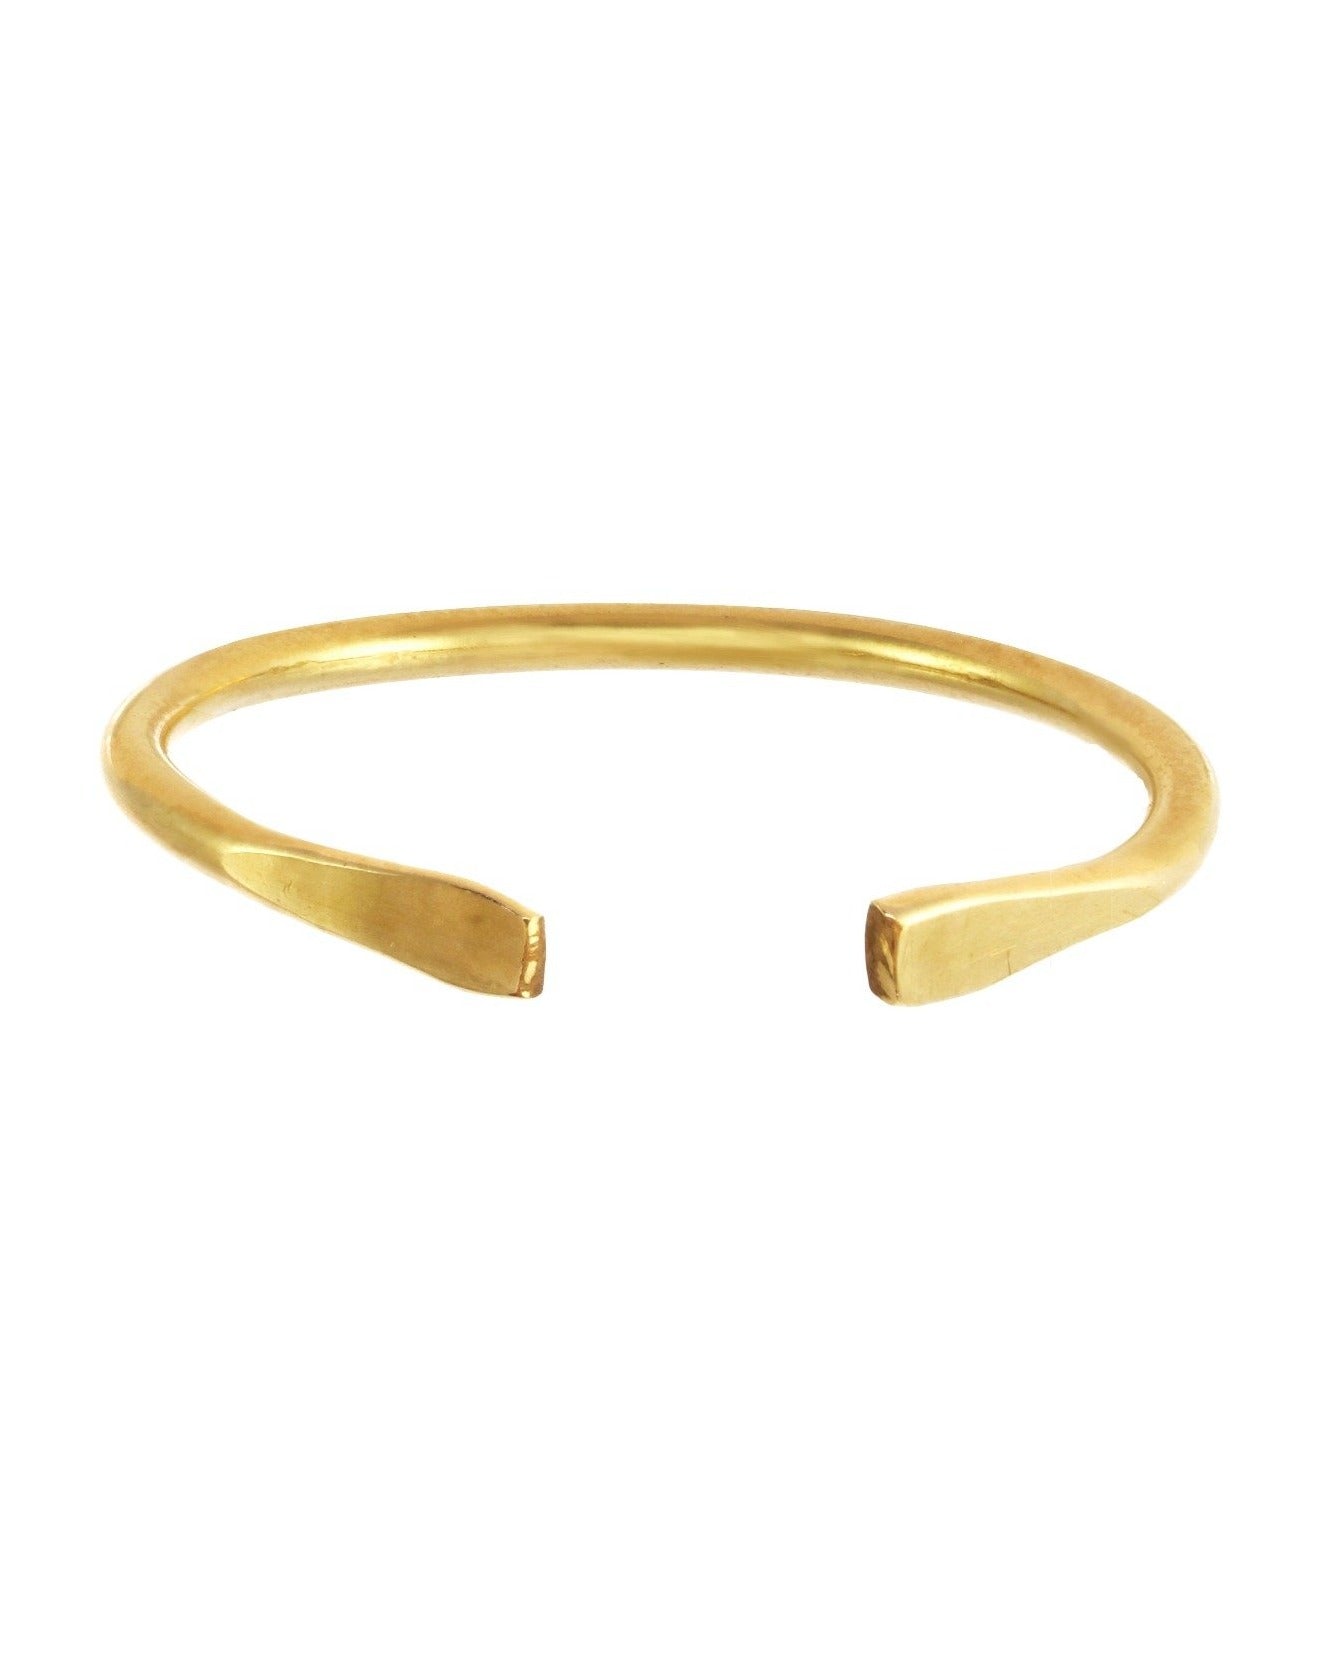 Aperture Ring by KOZAKH. A hammered open ring, crafted in 14K Gold Filled.